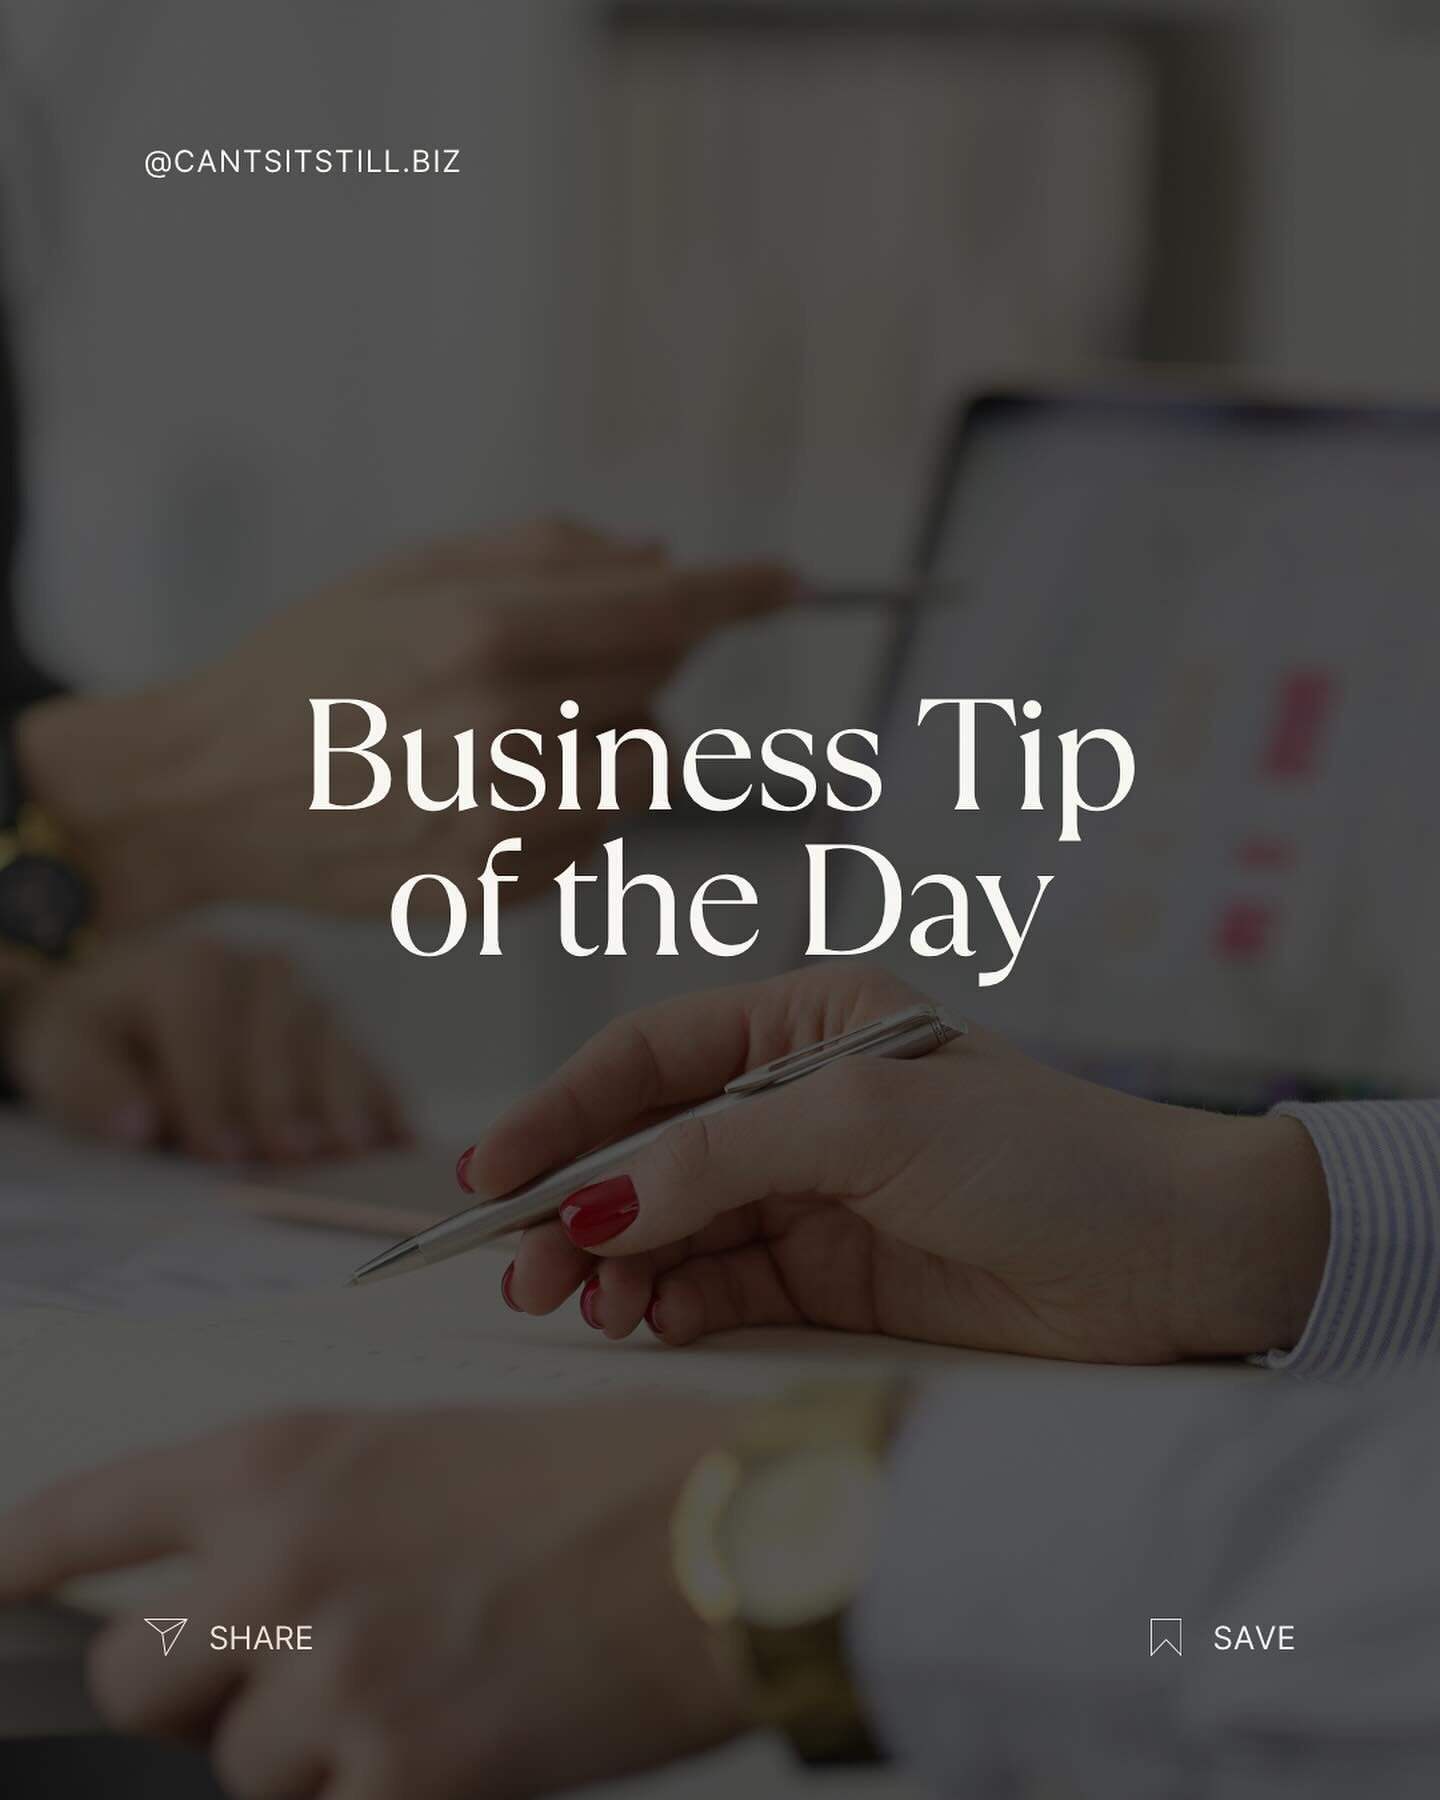 #businesstipoftheday In business, it is important to always track your metrics. They are what guide and tell you what&rsquo;s working and what&rsquo;s not. 

The metrics you should track in your business depend on your industry, goals, and key perfor